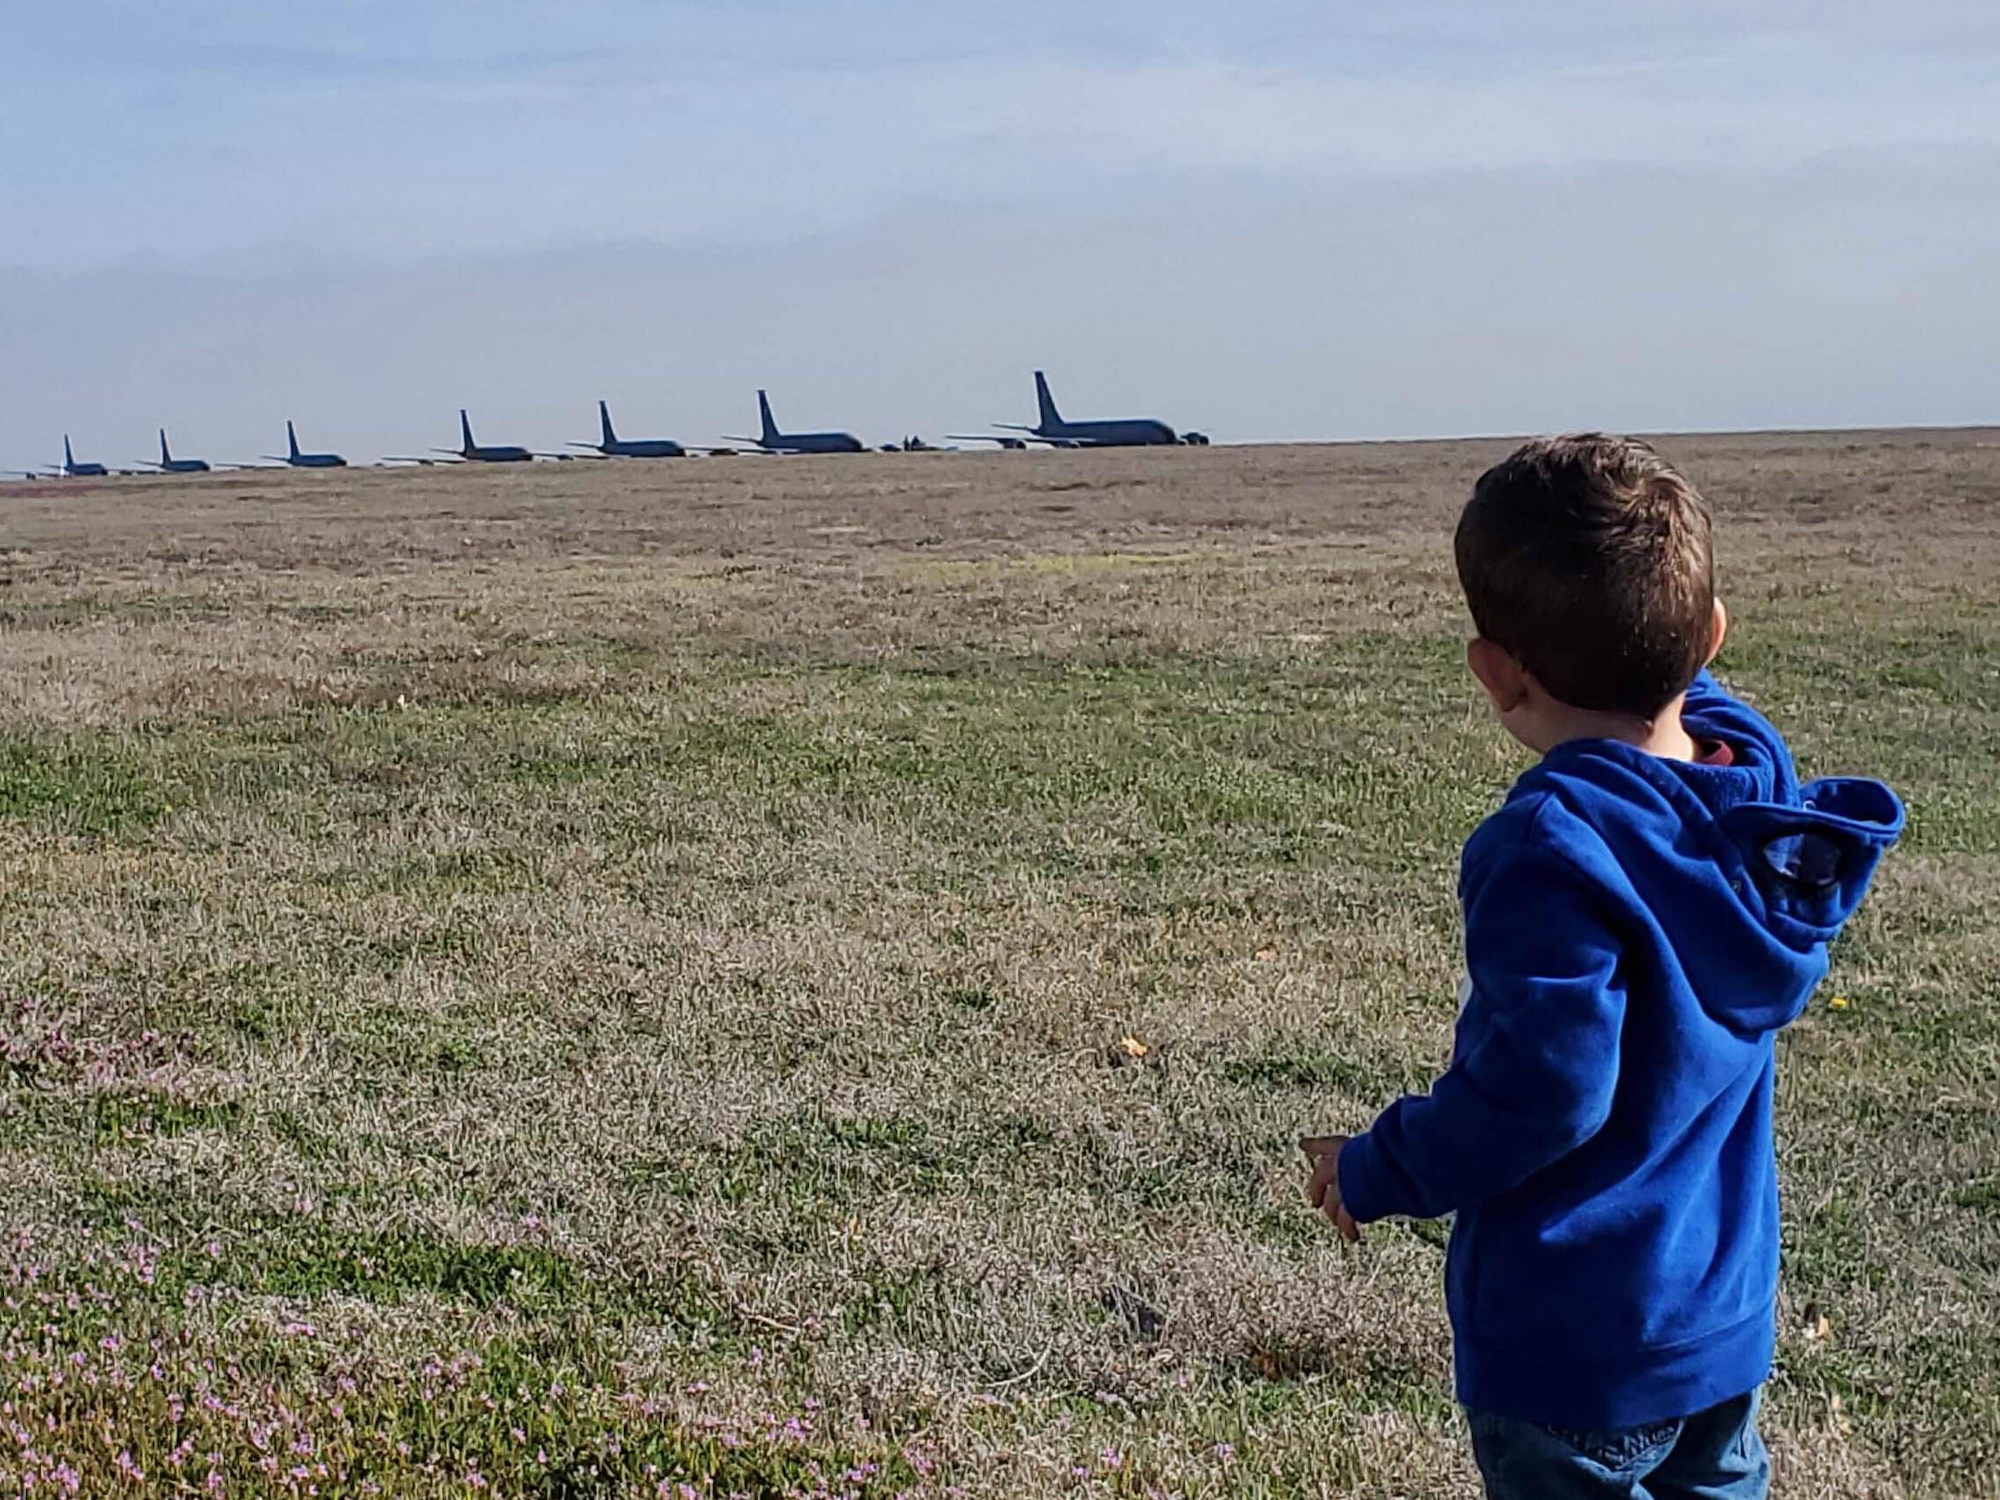 A child looks toward KC-135 Stratotankers taxiing on the Altus Air Force Base, Oklahoma runway, March 24, 2023 during a large force exercise. Many spectators came out to view the exercise, including Airmen, members of the community and military dependents. (U.S. Air Force photo by Master Sgt. Nathan Allen)